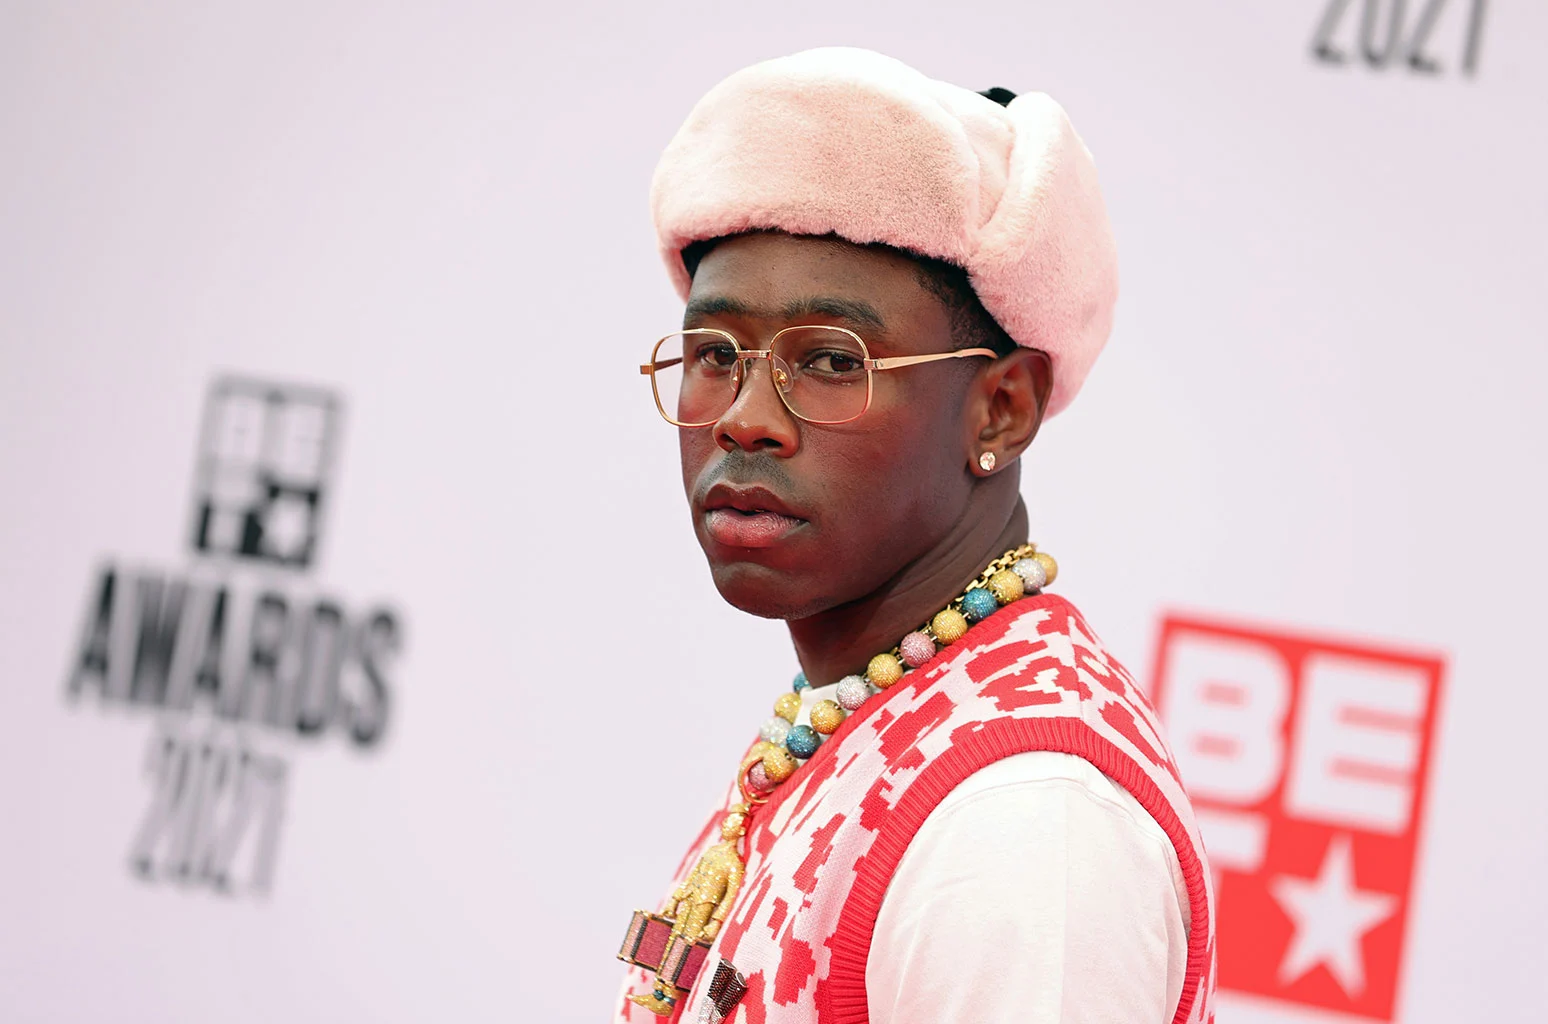 Who Are The Artists That Tyler the Creator Had Collaborations With?